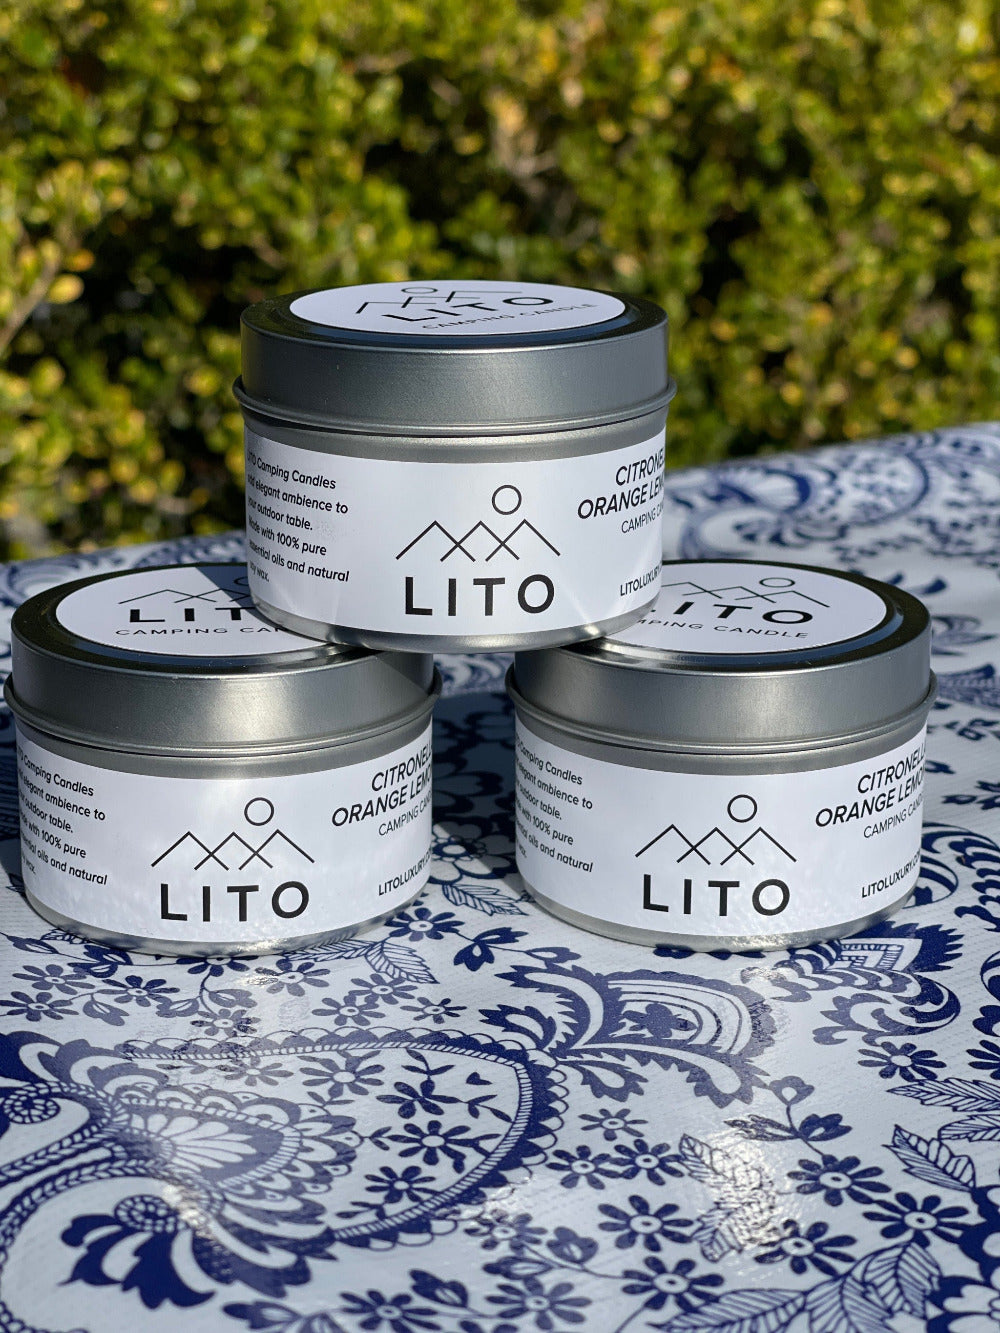 LITO Soy Camping Candle Handmade With 100% Essential Oils - No Chemicals Or Fragrances